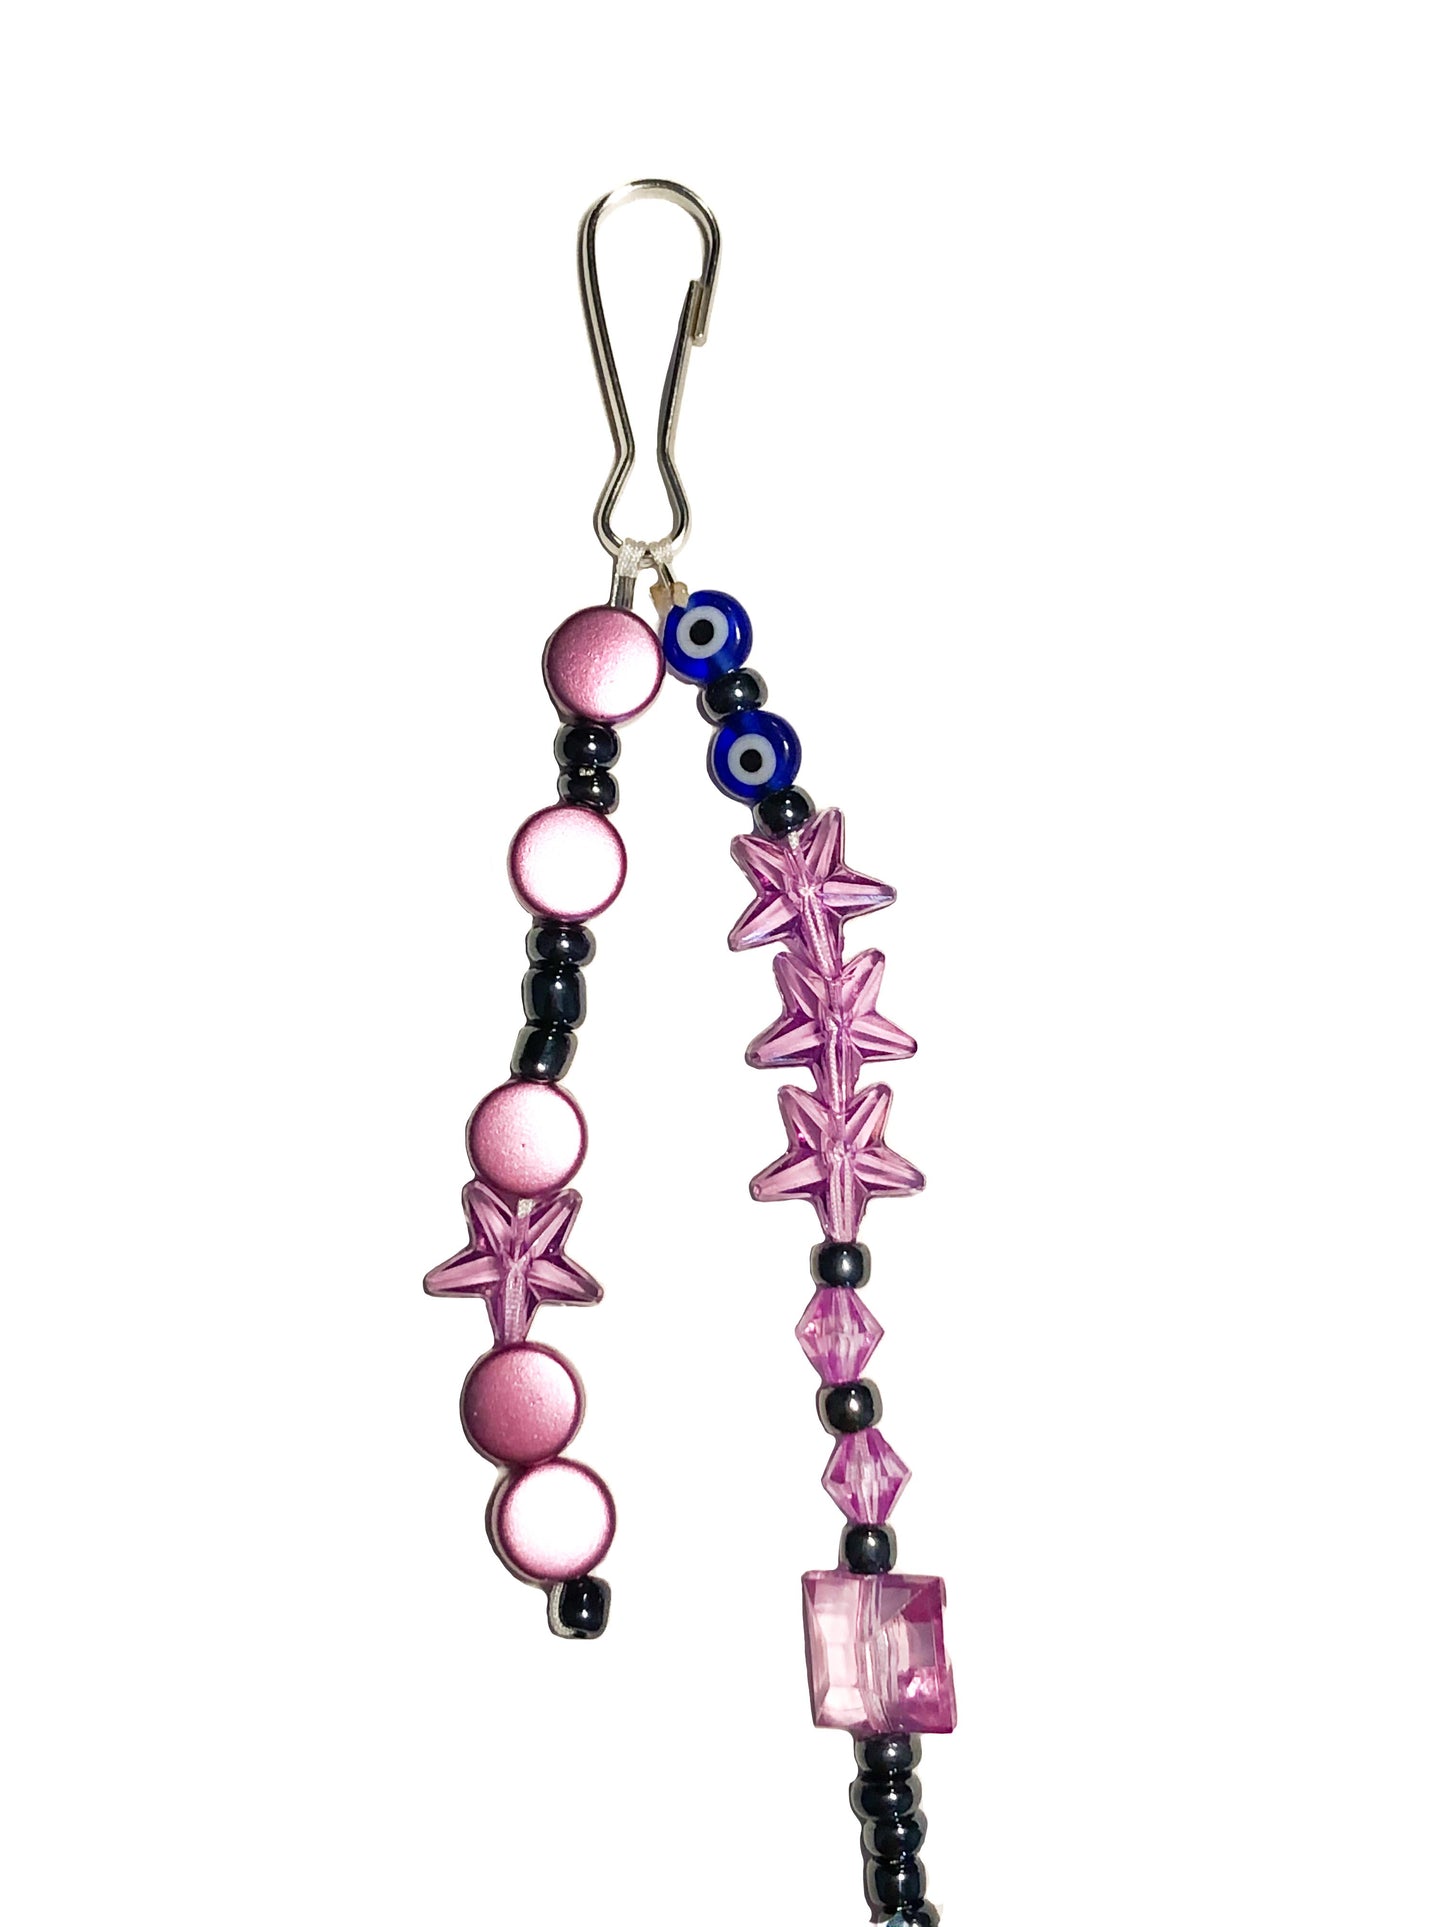 Pink and black beaded bag charm with a ball and evil eye charms.